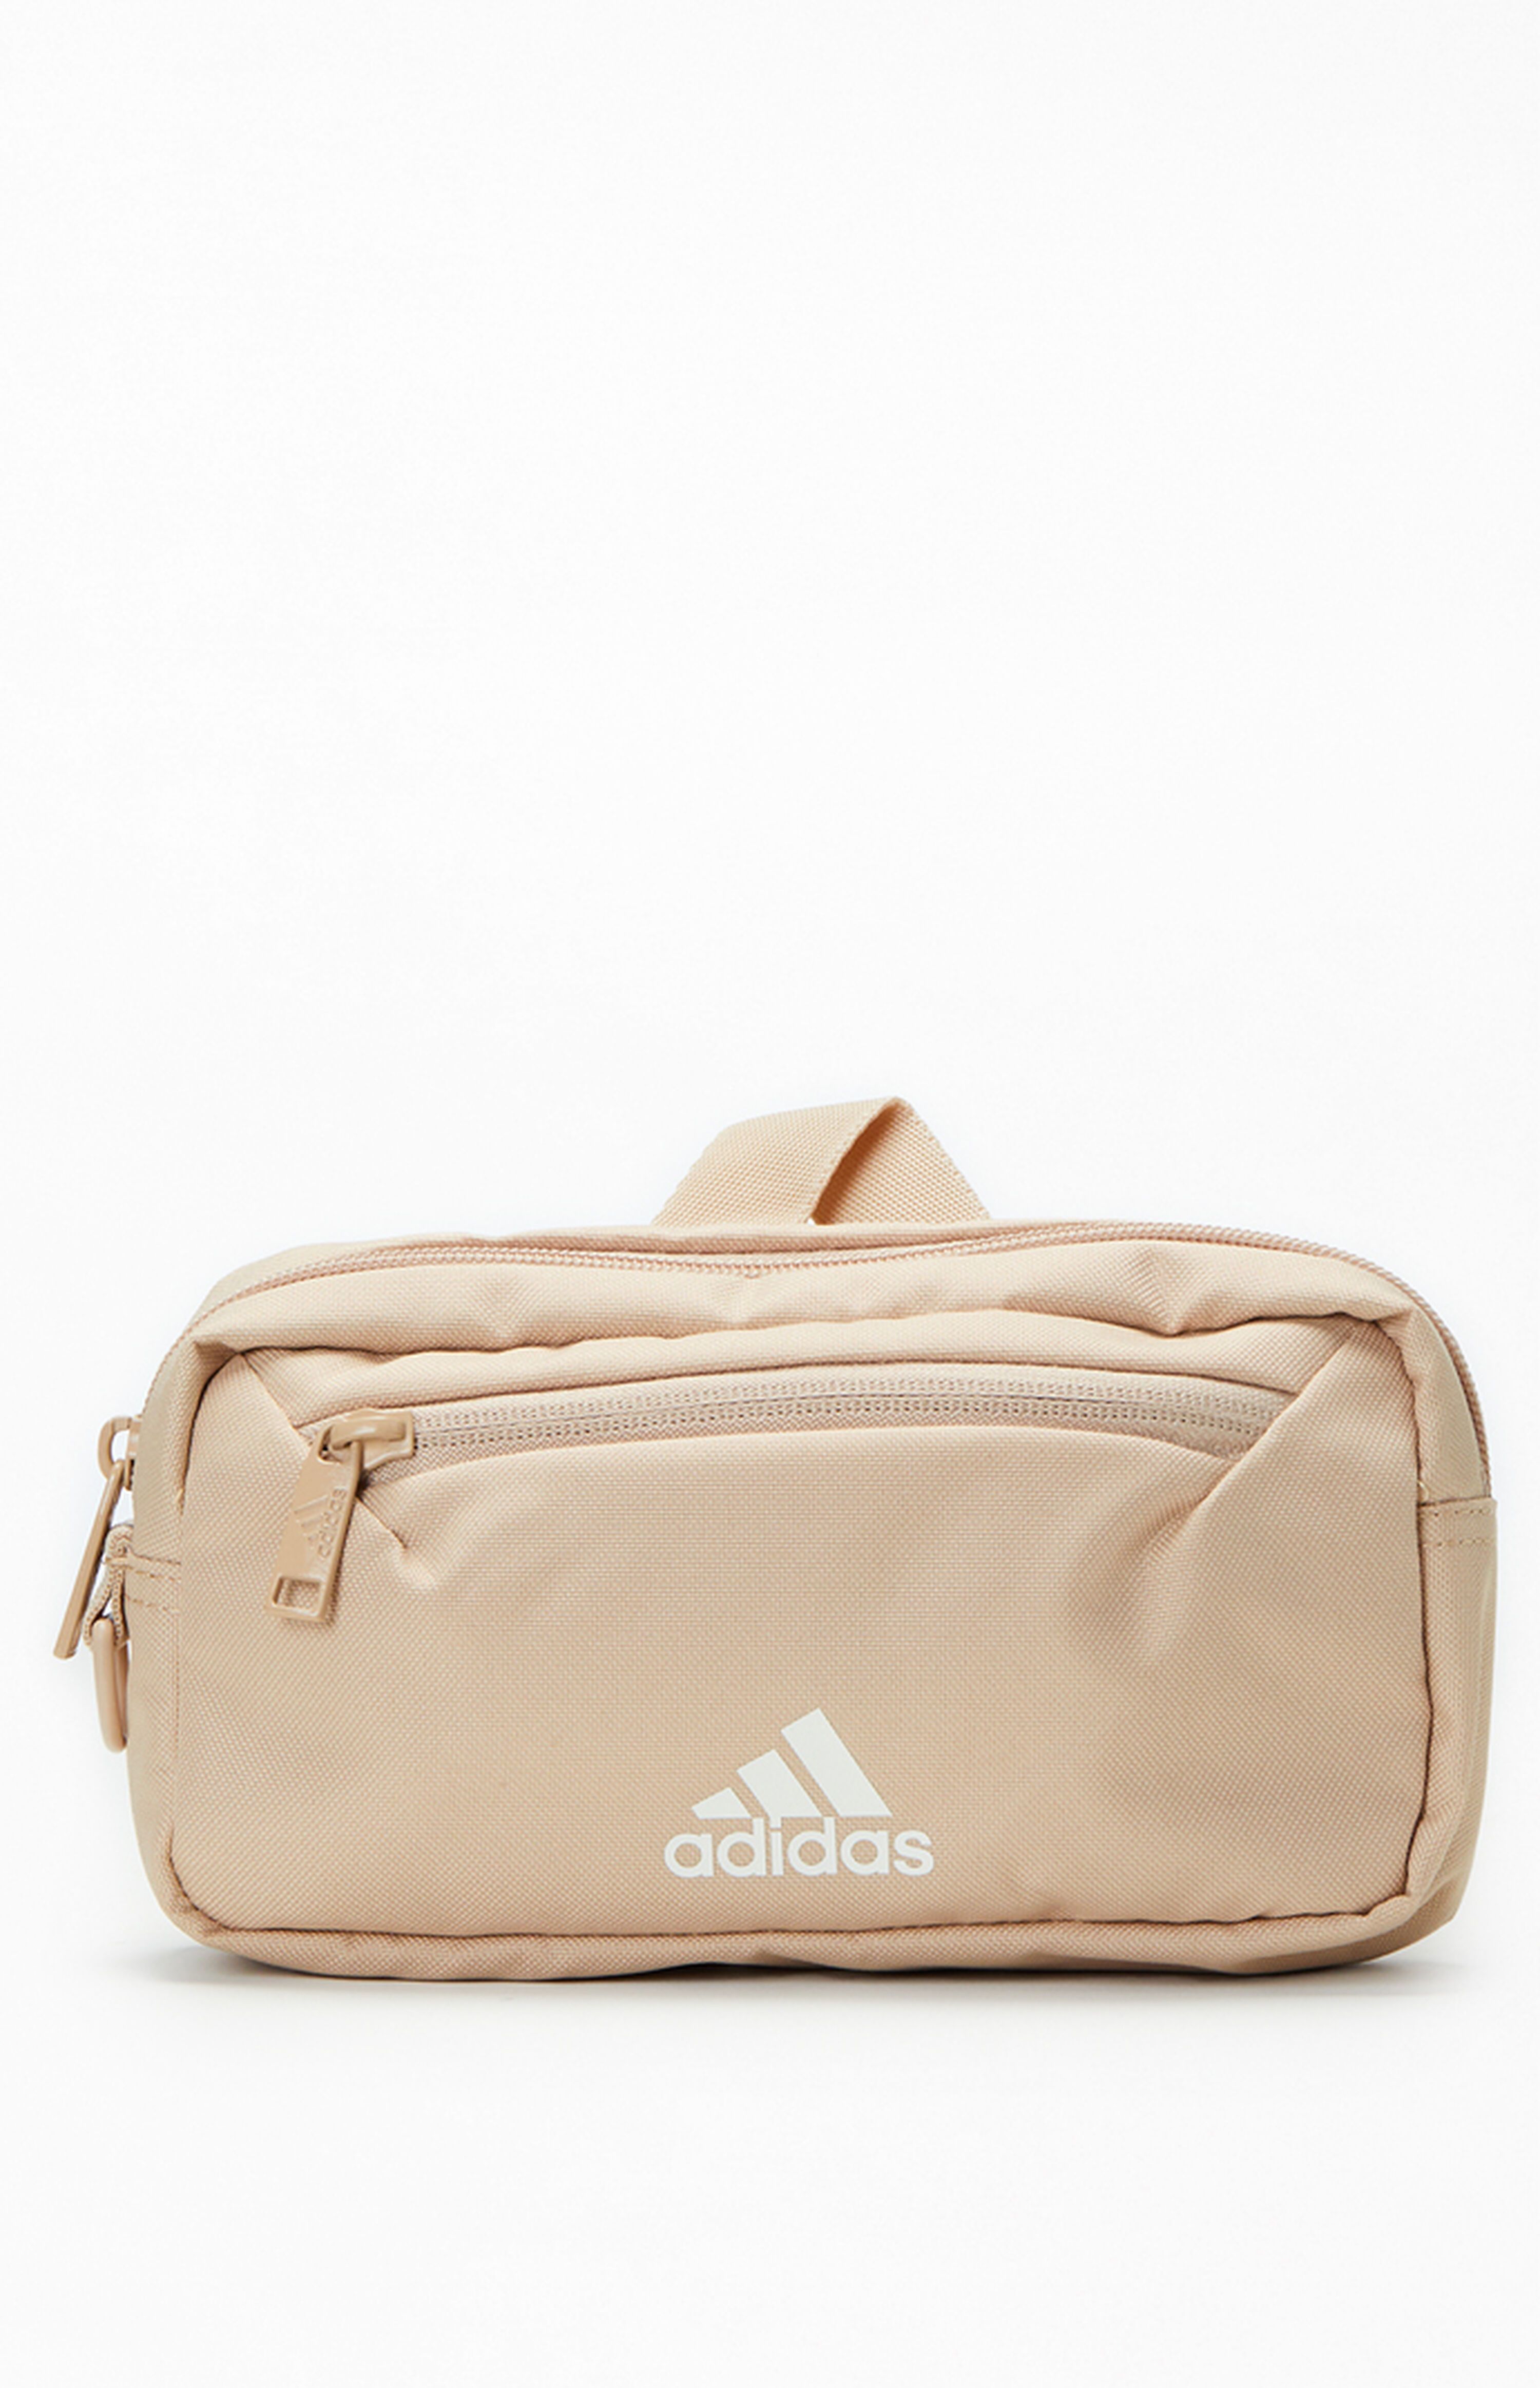 adidas Must-Have 2 Waist Pack | PacSun